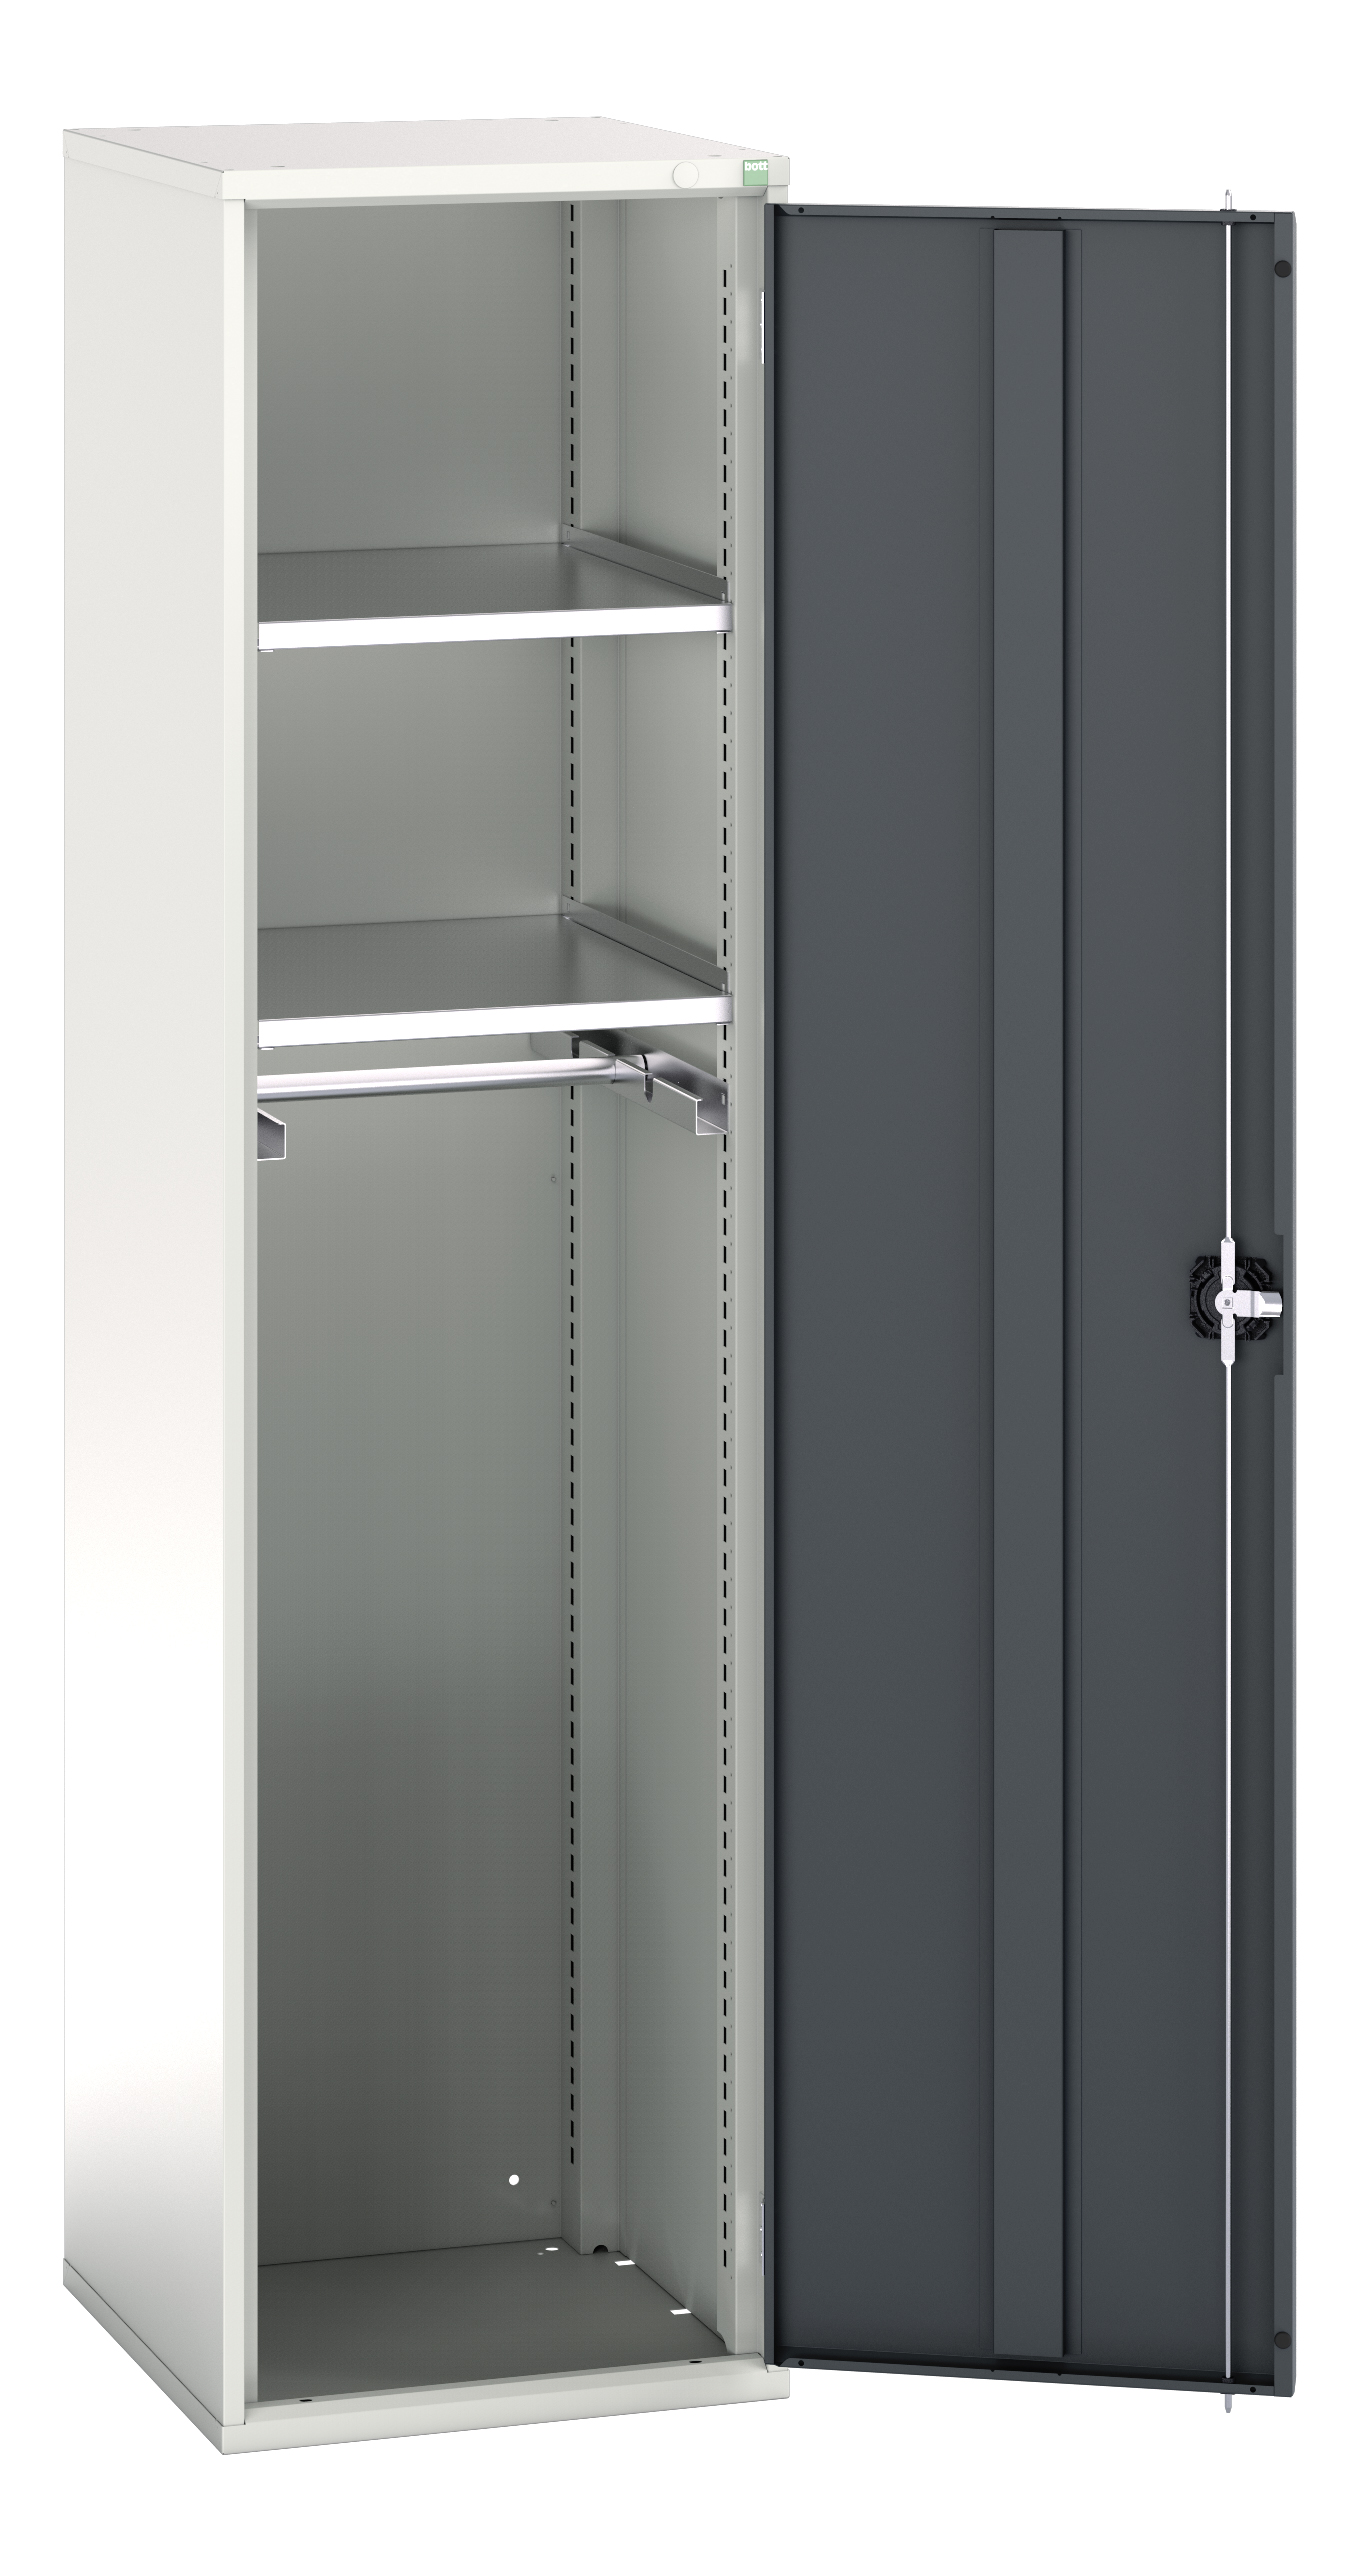 Bott Verso Ppe / Janitorial Kitted Cupboard - 16926351.19